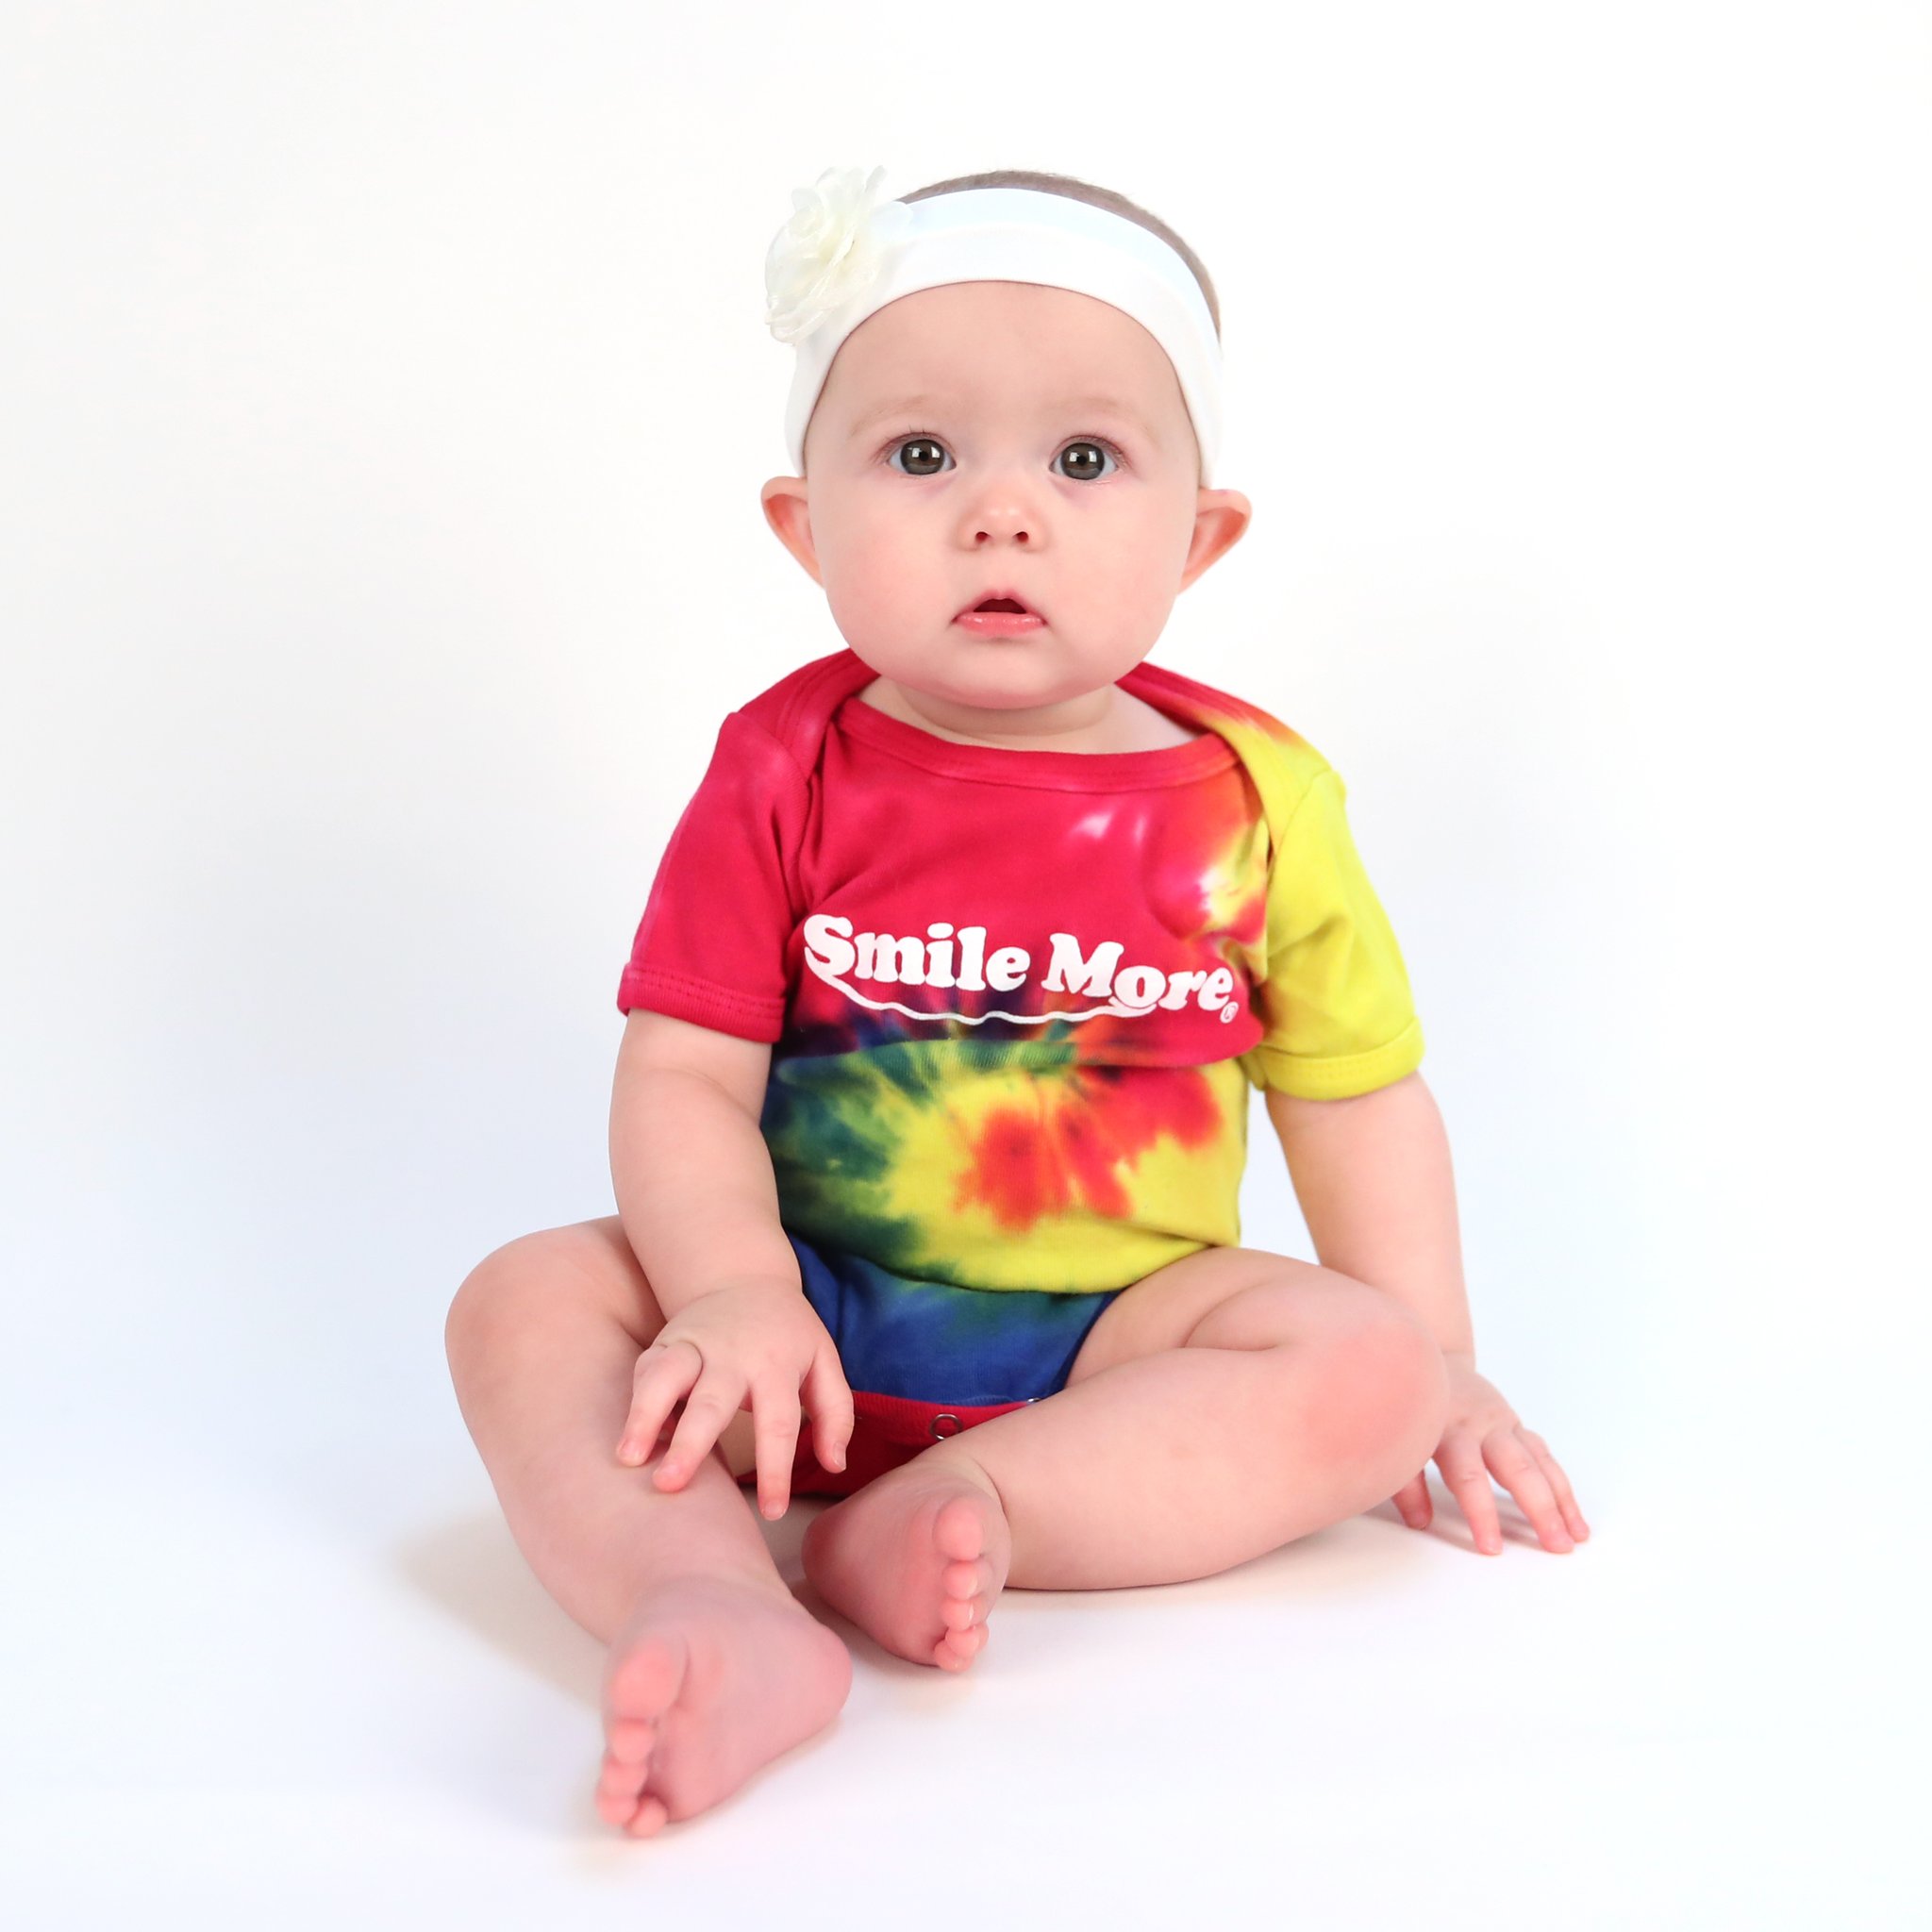 Smile More Infant Creeper – The Smile More Store